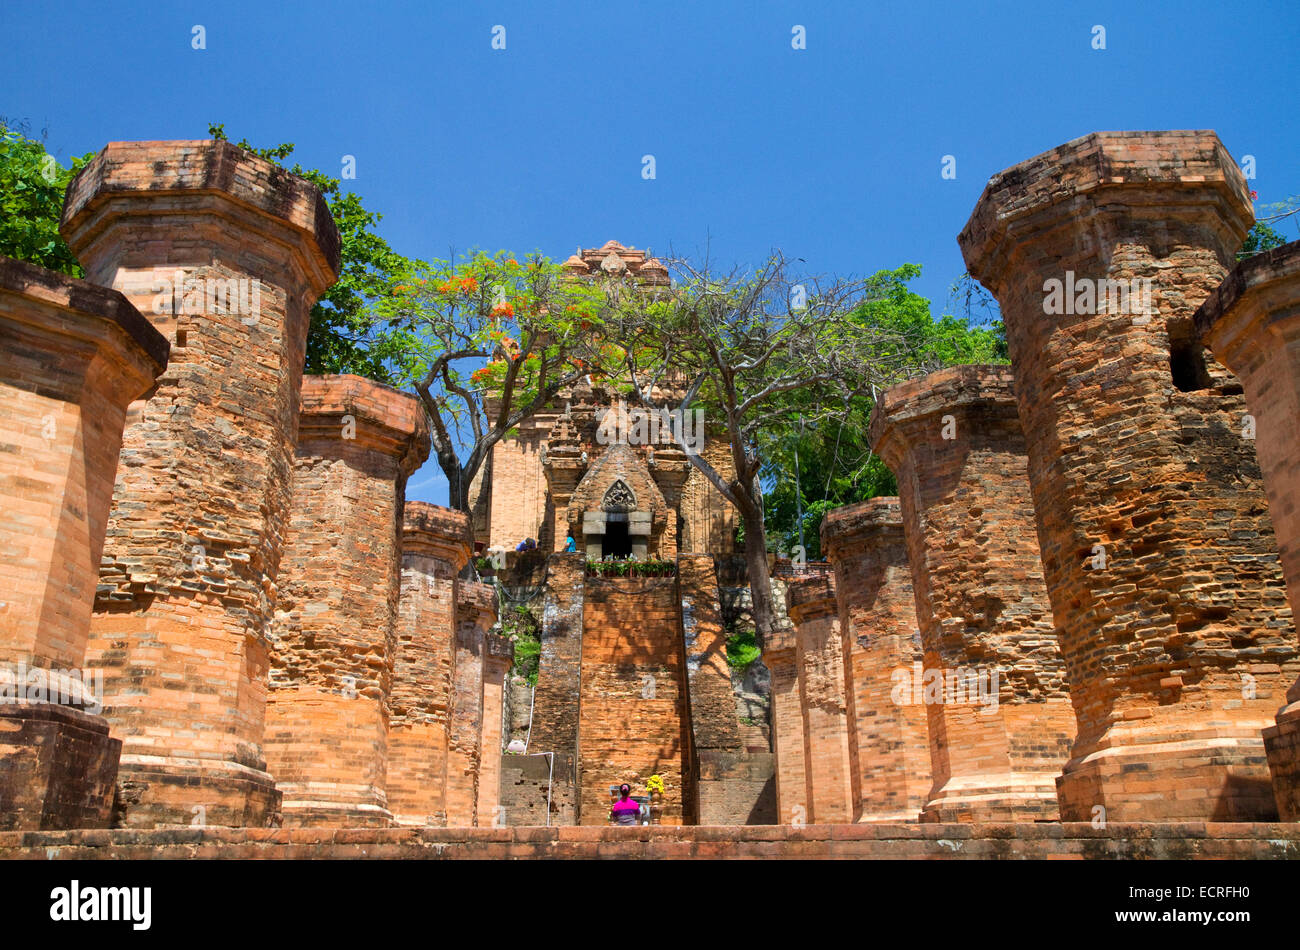 Po Nagar is a Cham temple tower located in the medieval principality of Kauthara near Nha Trang, Vietnam. Stock Photo